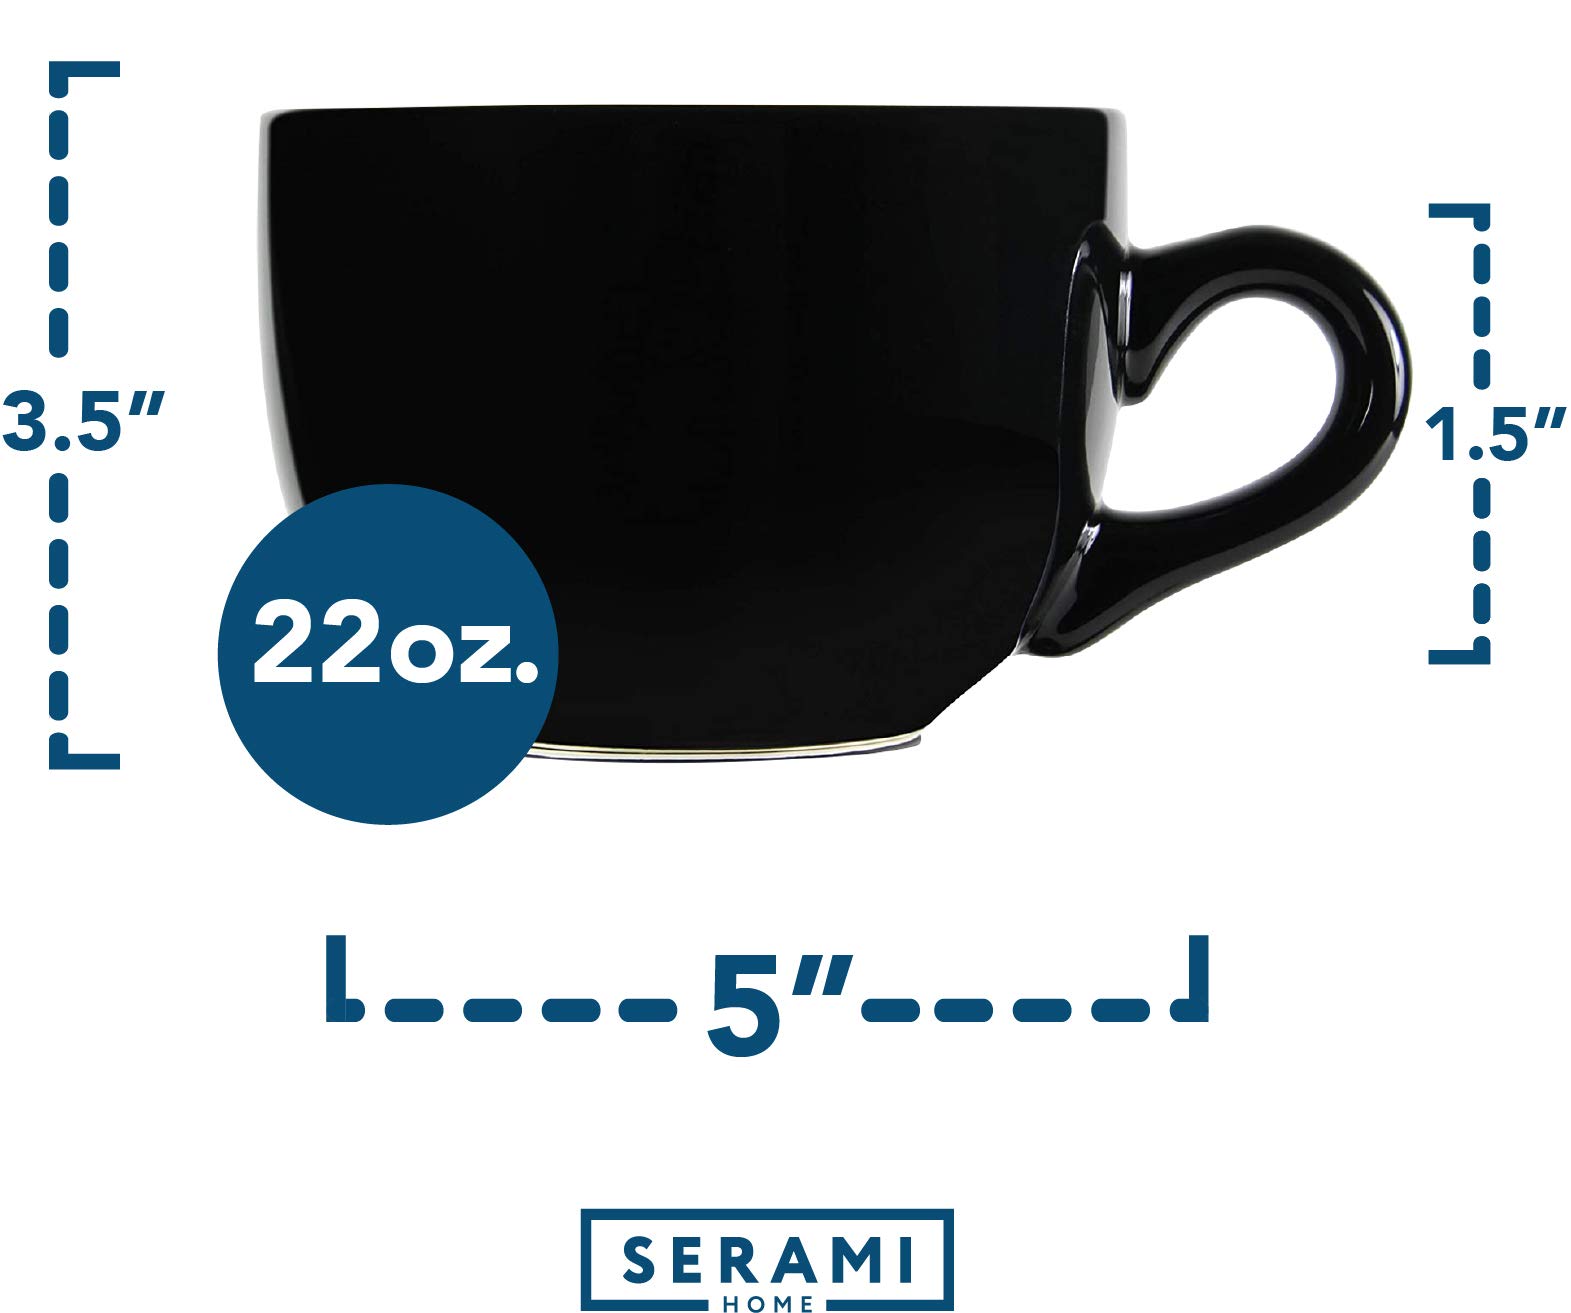 Serami Oversized Ceramic Coffee Mug with Handle - Large 22 oz Coffee Cup, Perfect for Latte, Cappuccino, Soup, Cereal - Ideal for Everyday Use - Ceramic Bowl Set, Large Coffee Mug Set (Black 4 Pack)